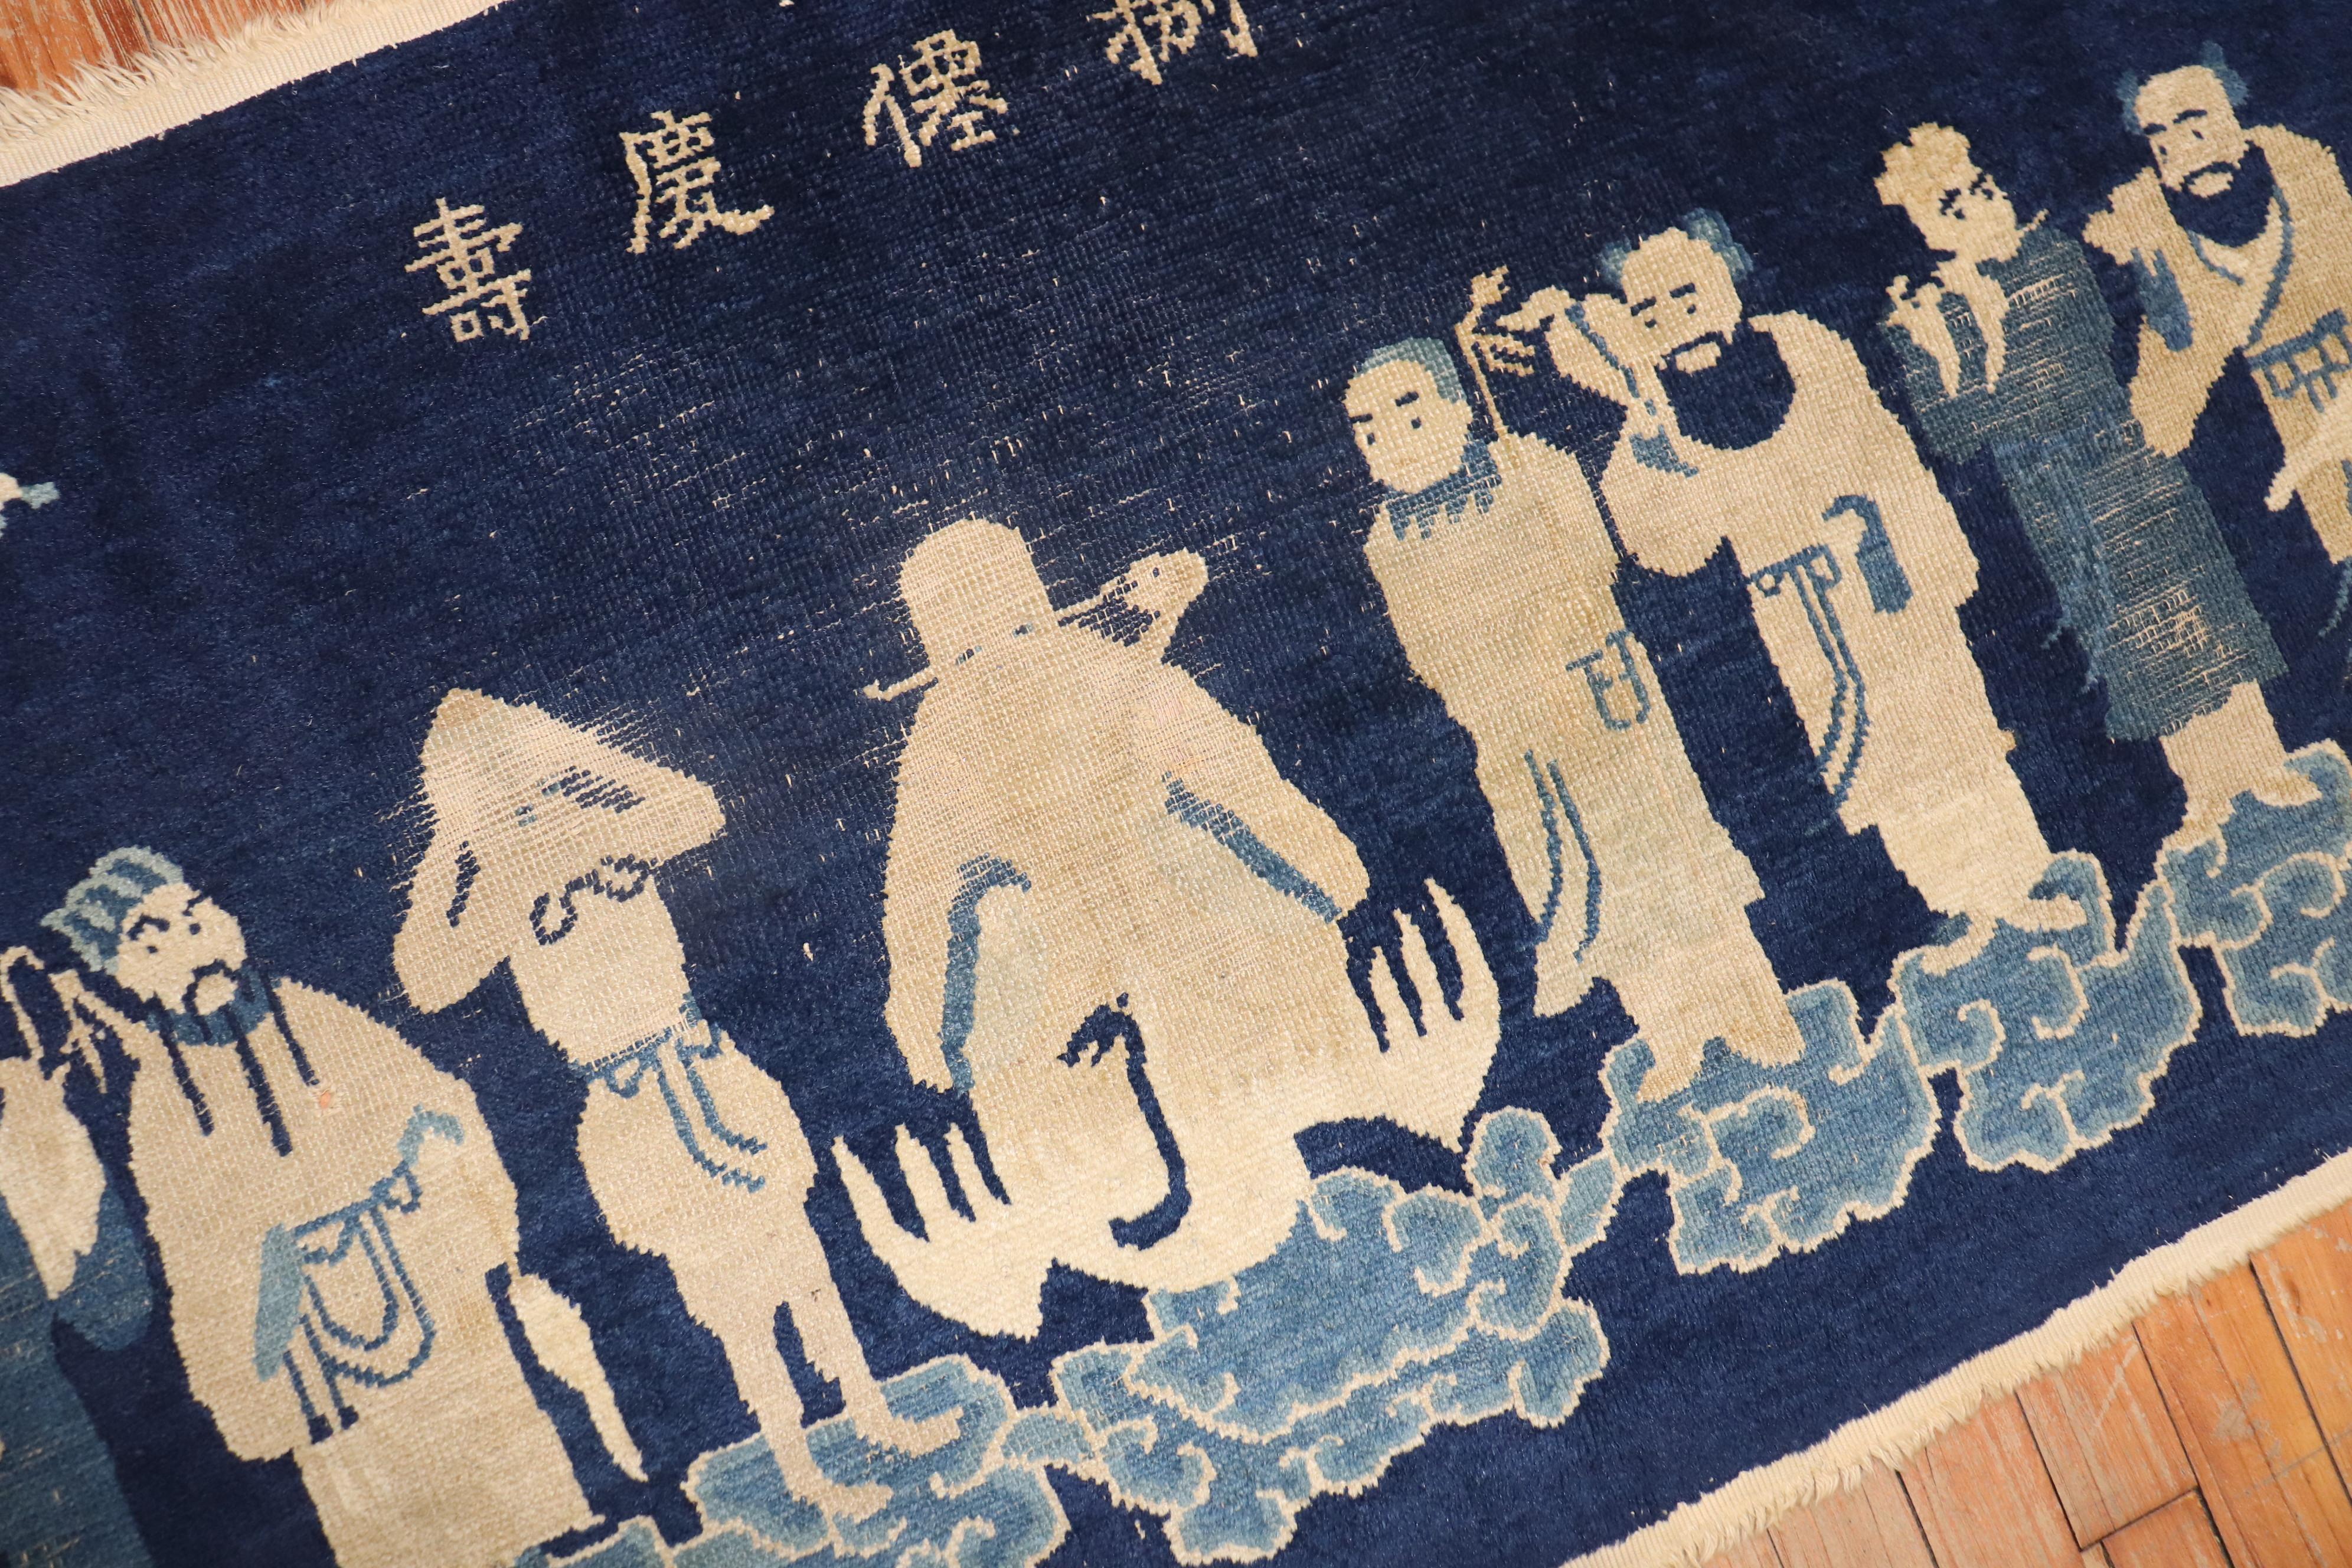 An early 20th century Chinese Buddha Discipile rug

Measures: 2'4'' x 6'.